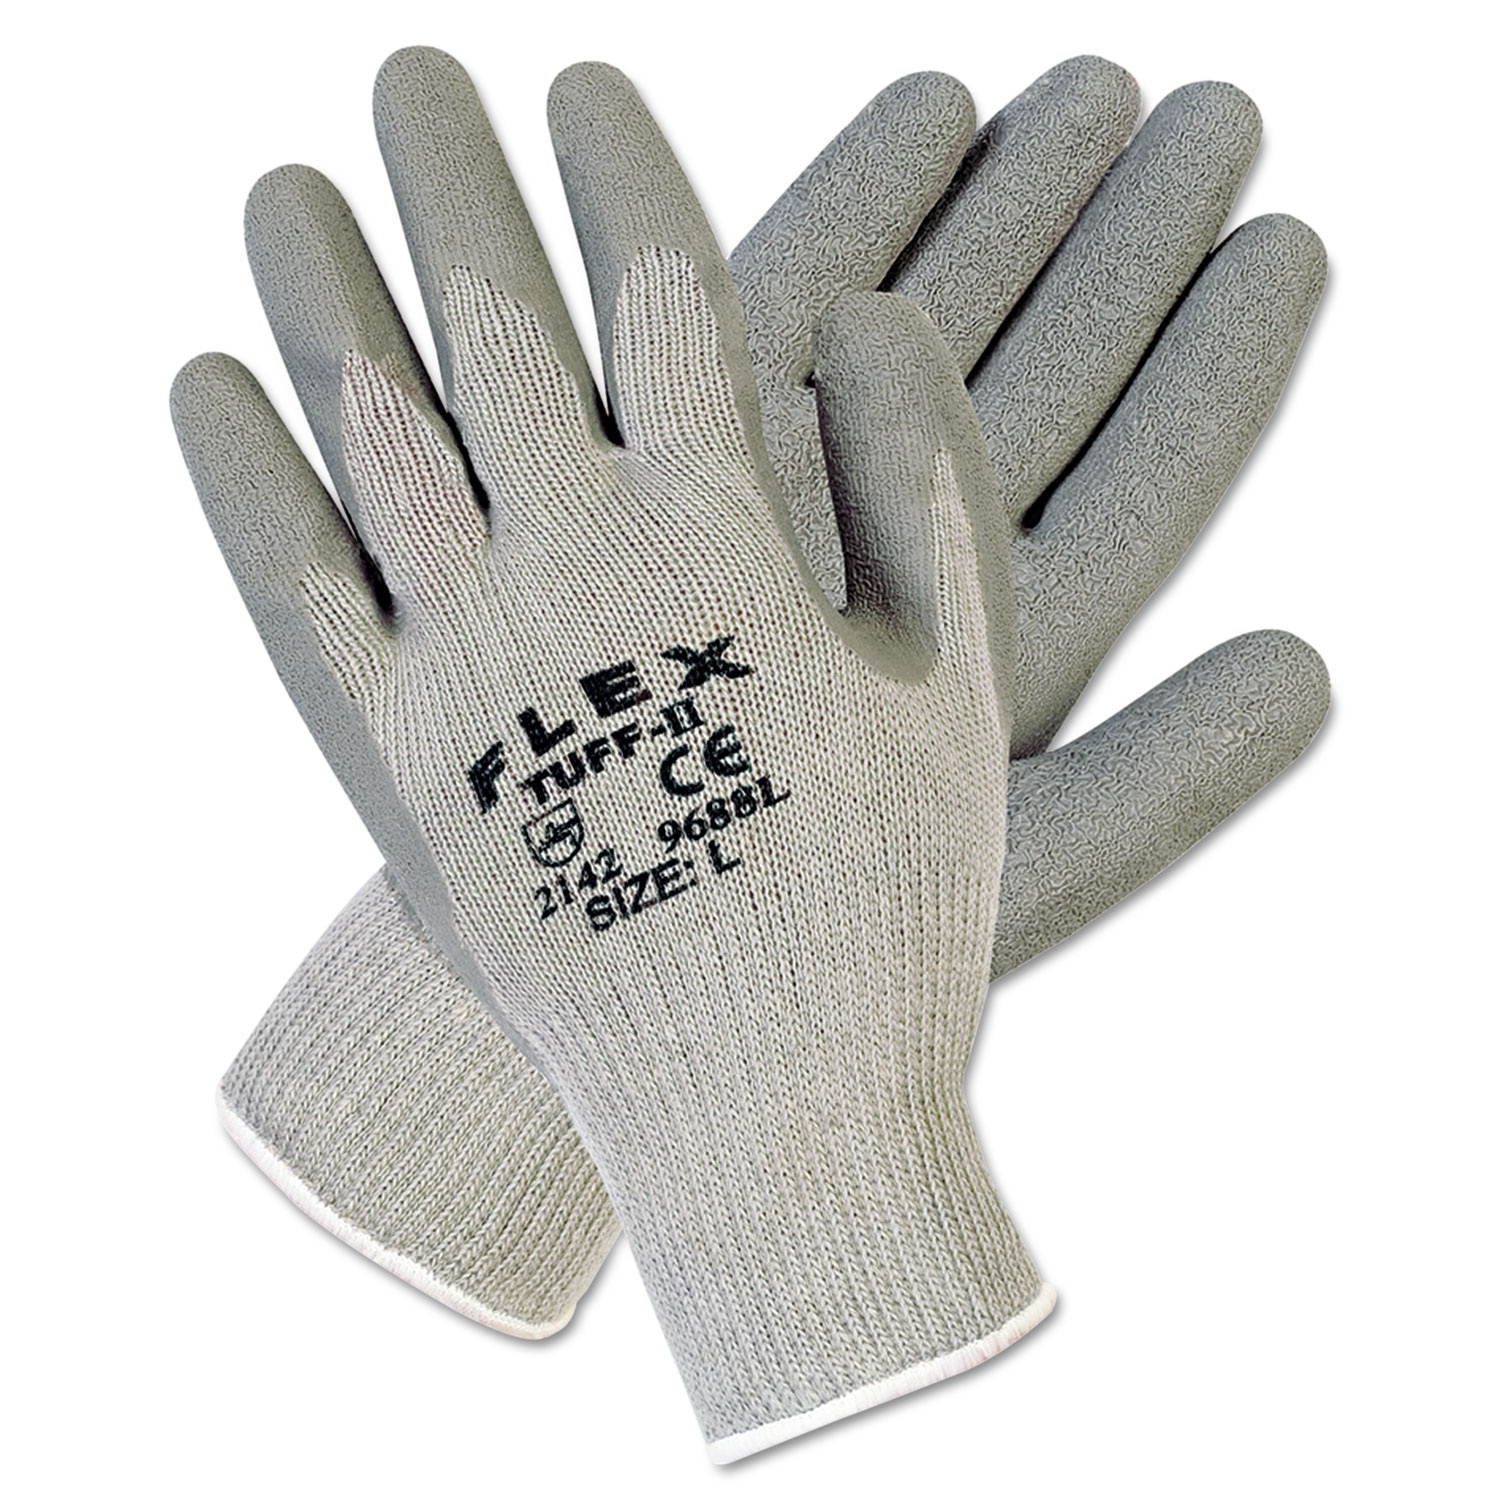  MCR Safety 127-9688L FlexTuff Latex Dipped Gloves, Gray, Large, 12 Pairs (MPG9688L) 